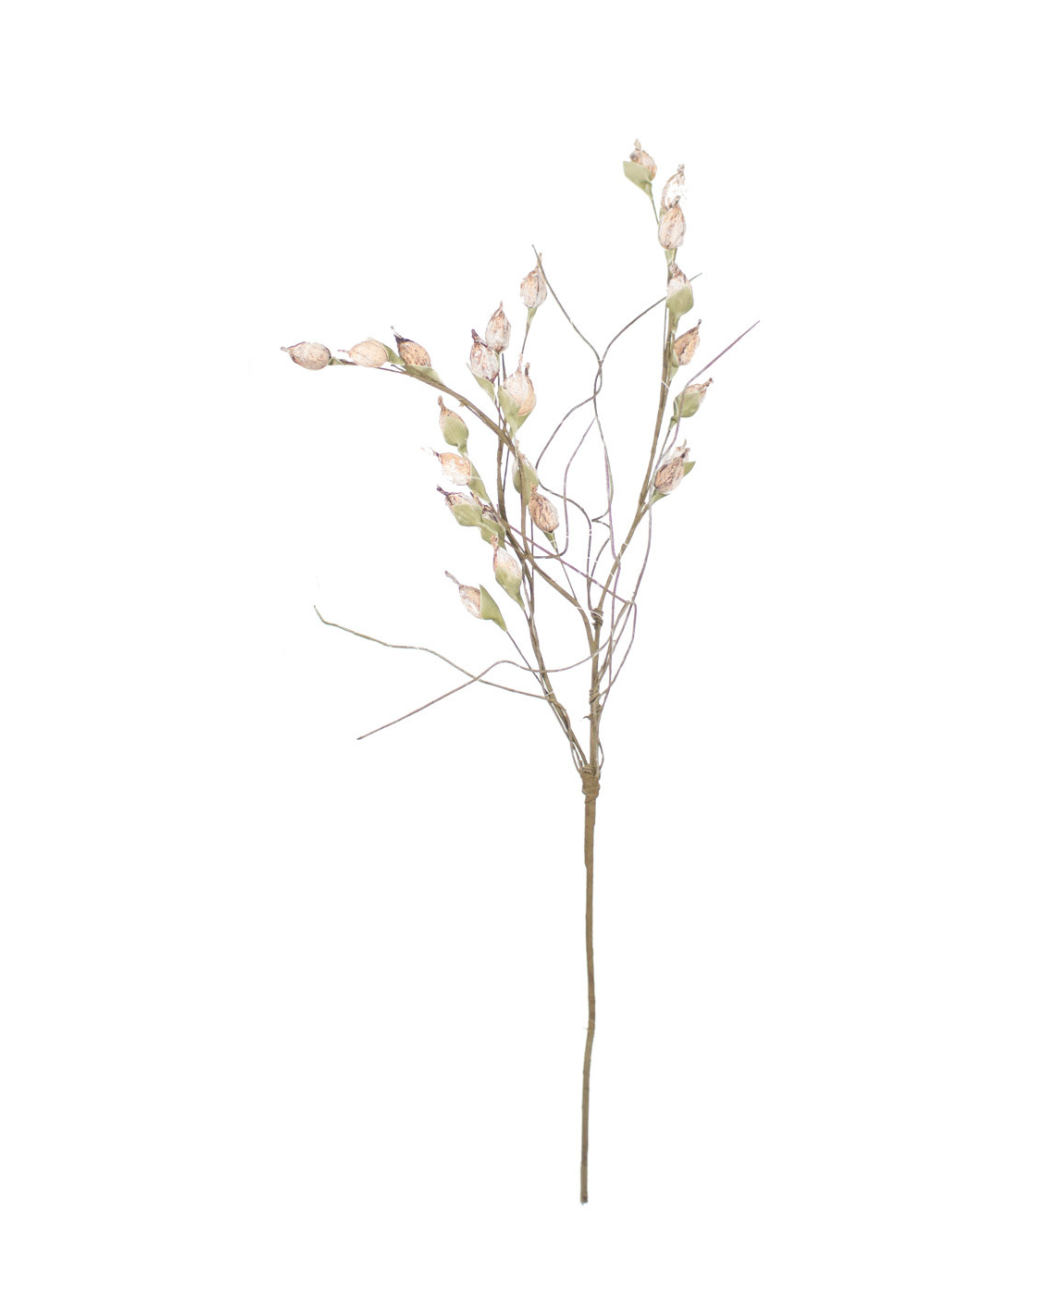 A single delicate Seedling botanical sprig from Kalalou, Inc in Scottsdale, Arizona, with small, pale pink buds and thin, wiry branches, isolated on a white background.